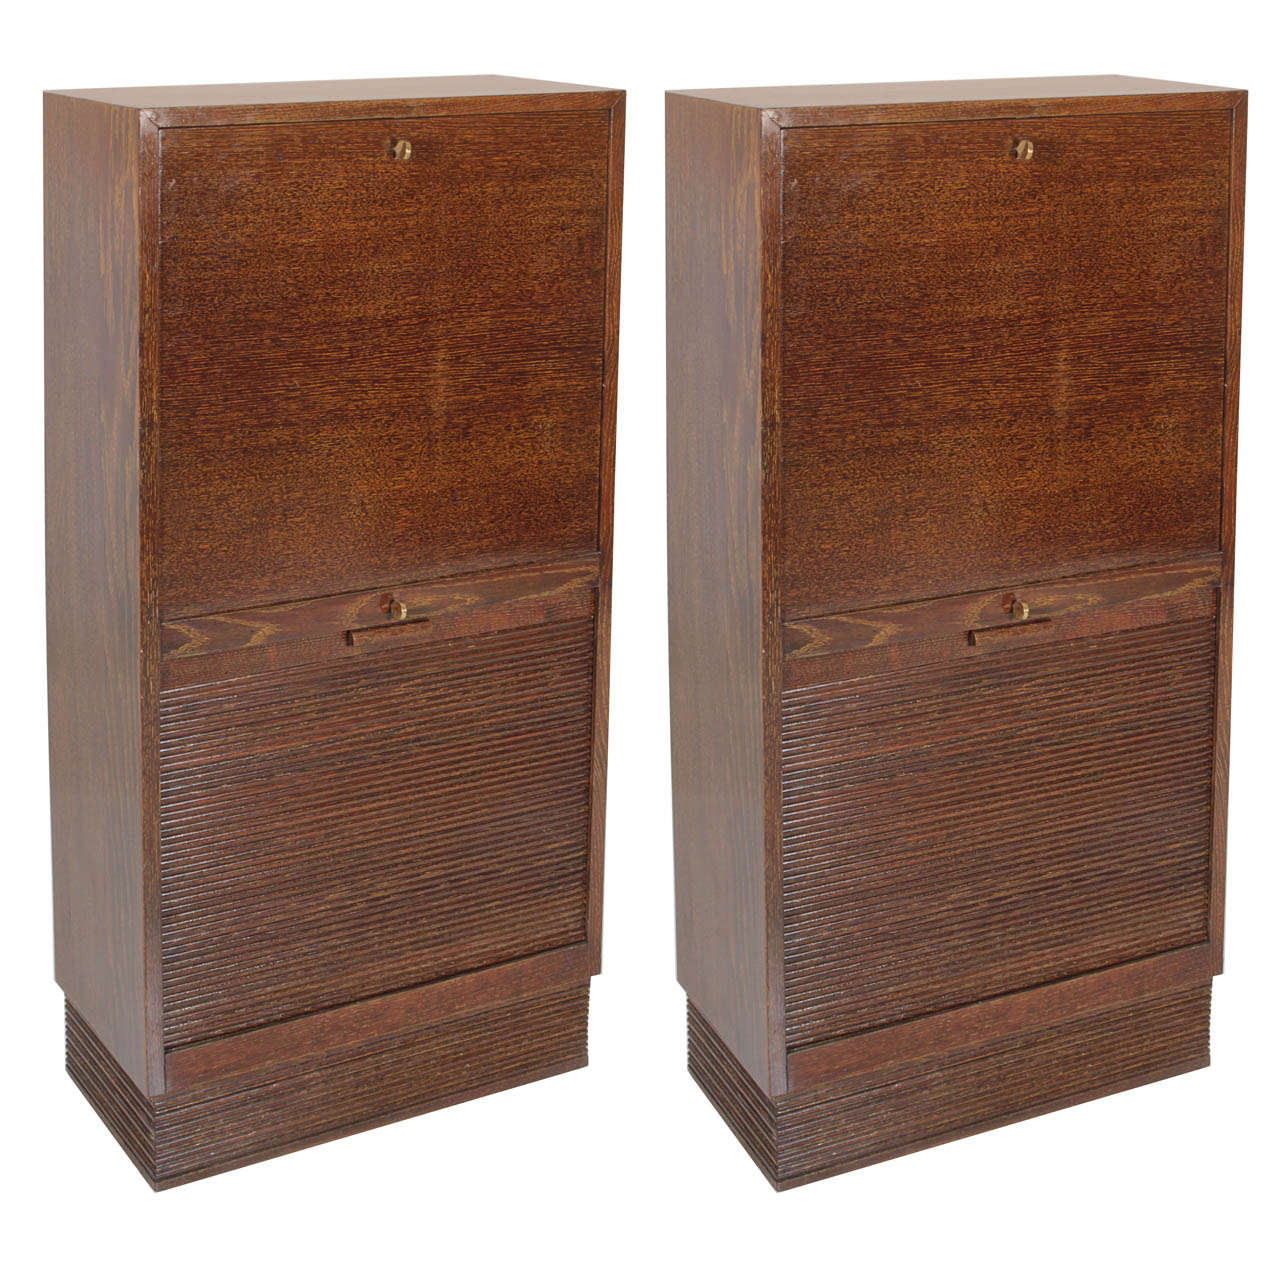 Pierre-Emile Legrain (attr.) Pair of French Art Deco drop and roll front cabinets c. 1927 For Sale